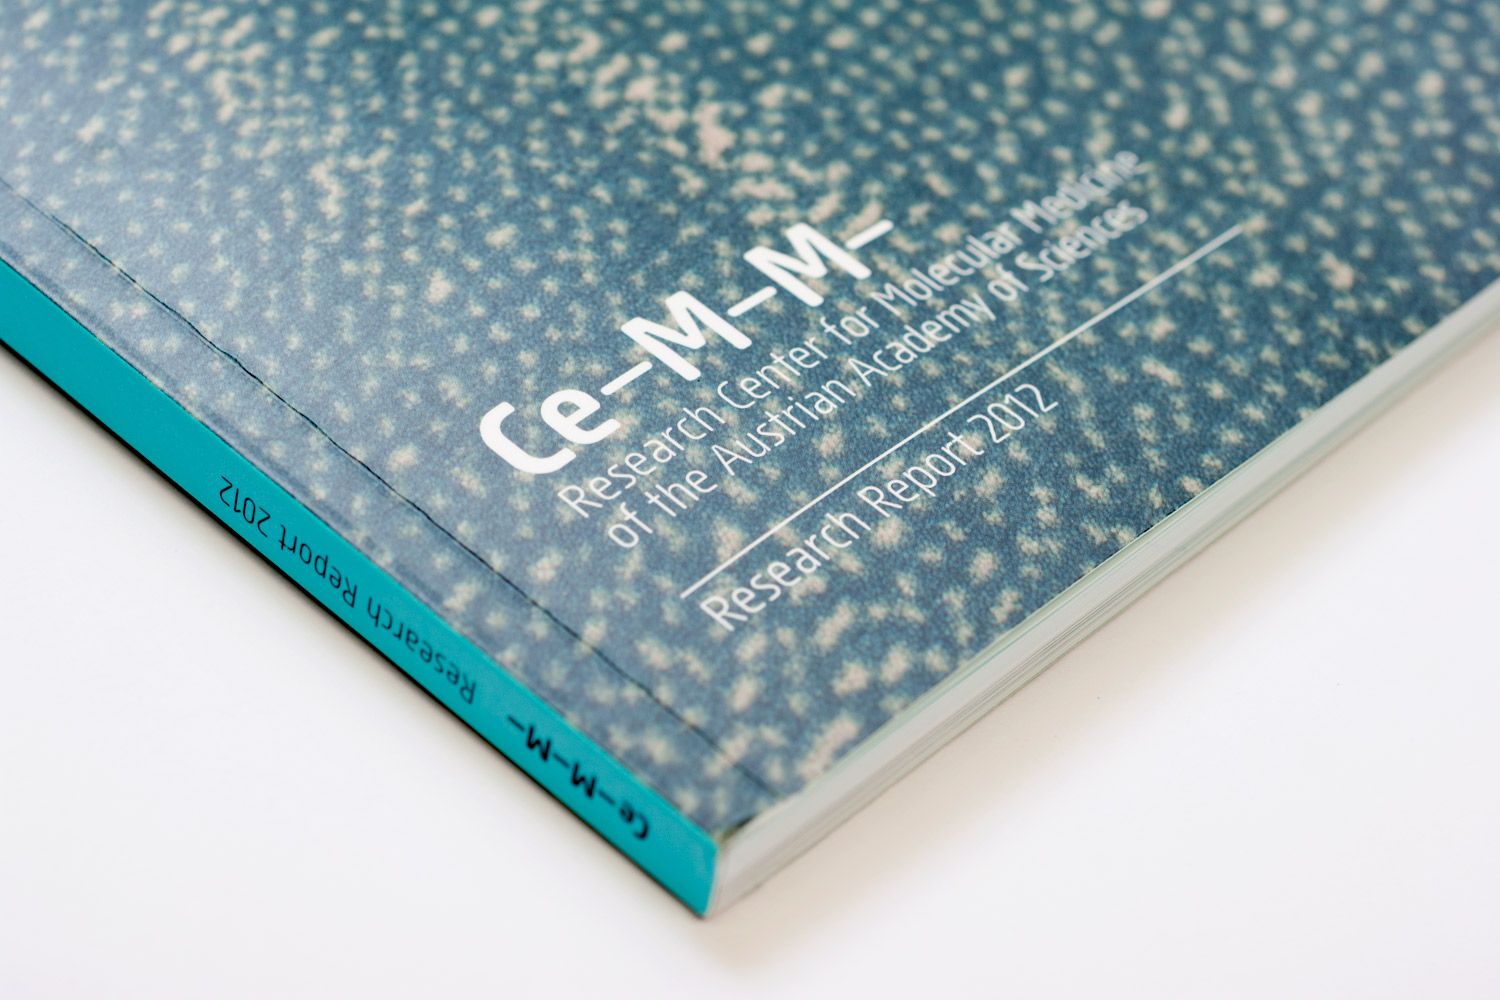 CeMM Report 2012 Cover Detail